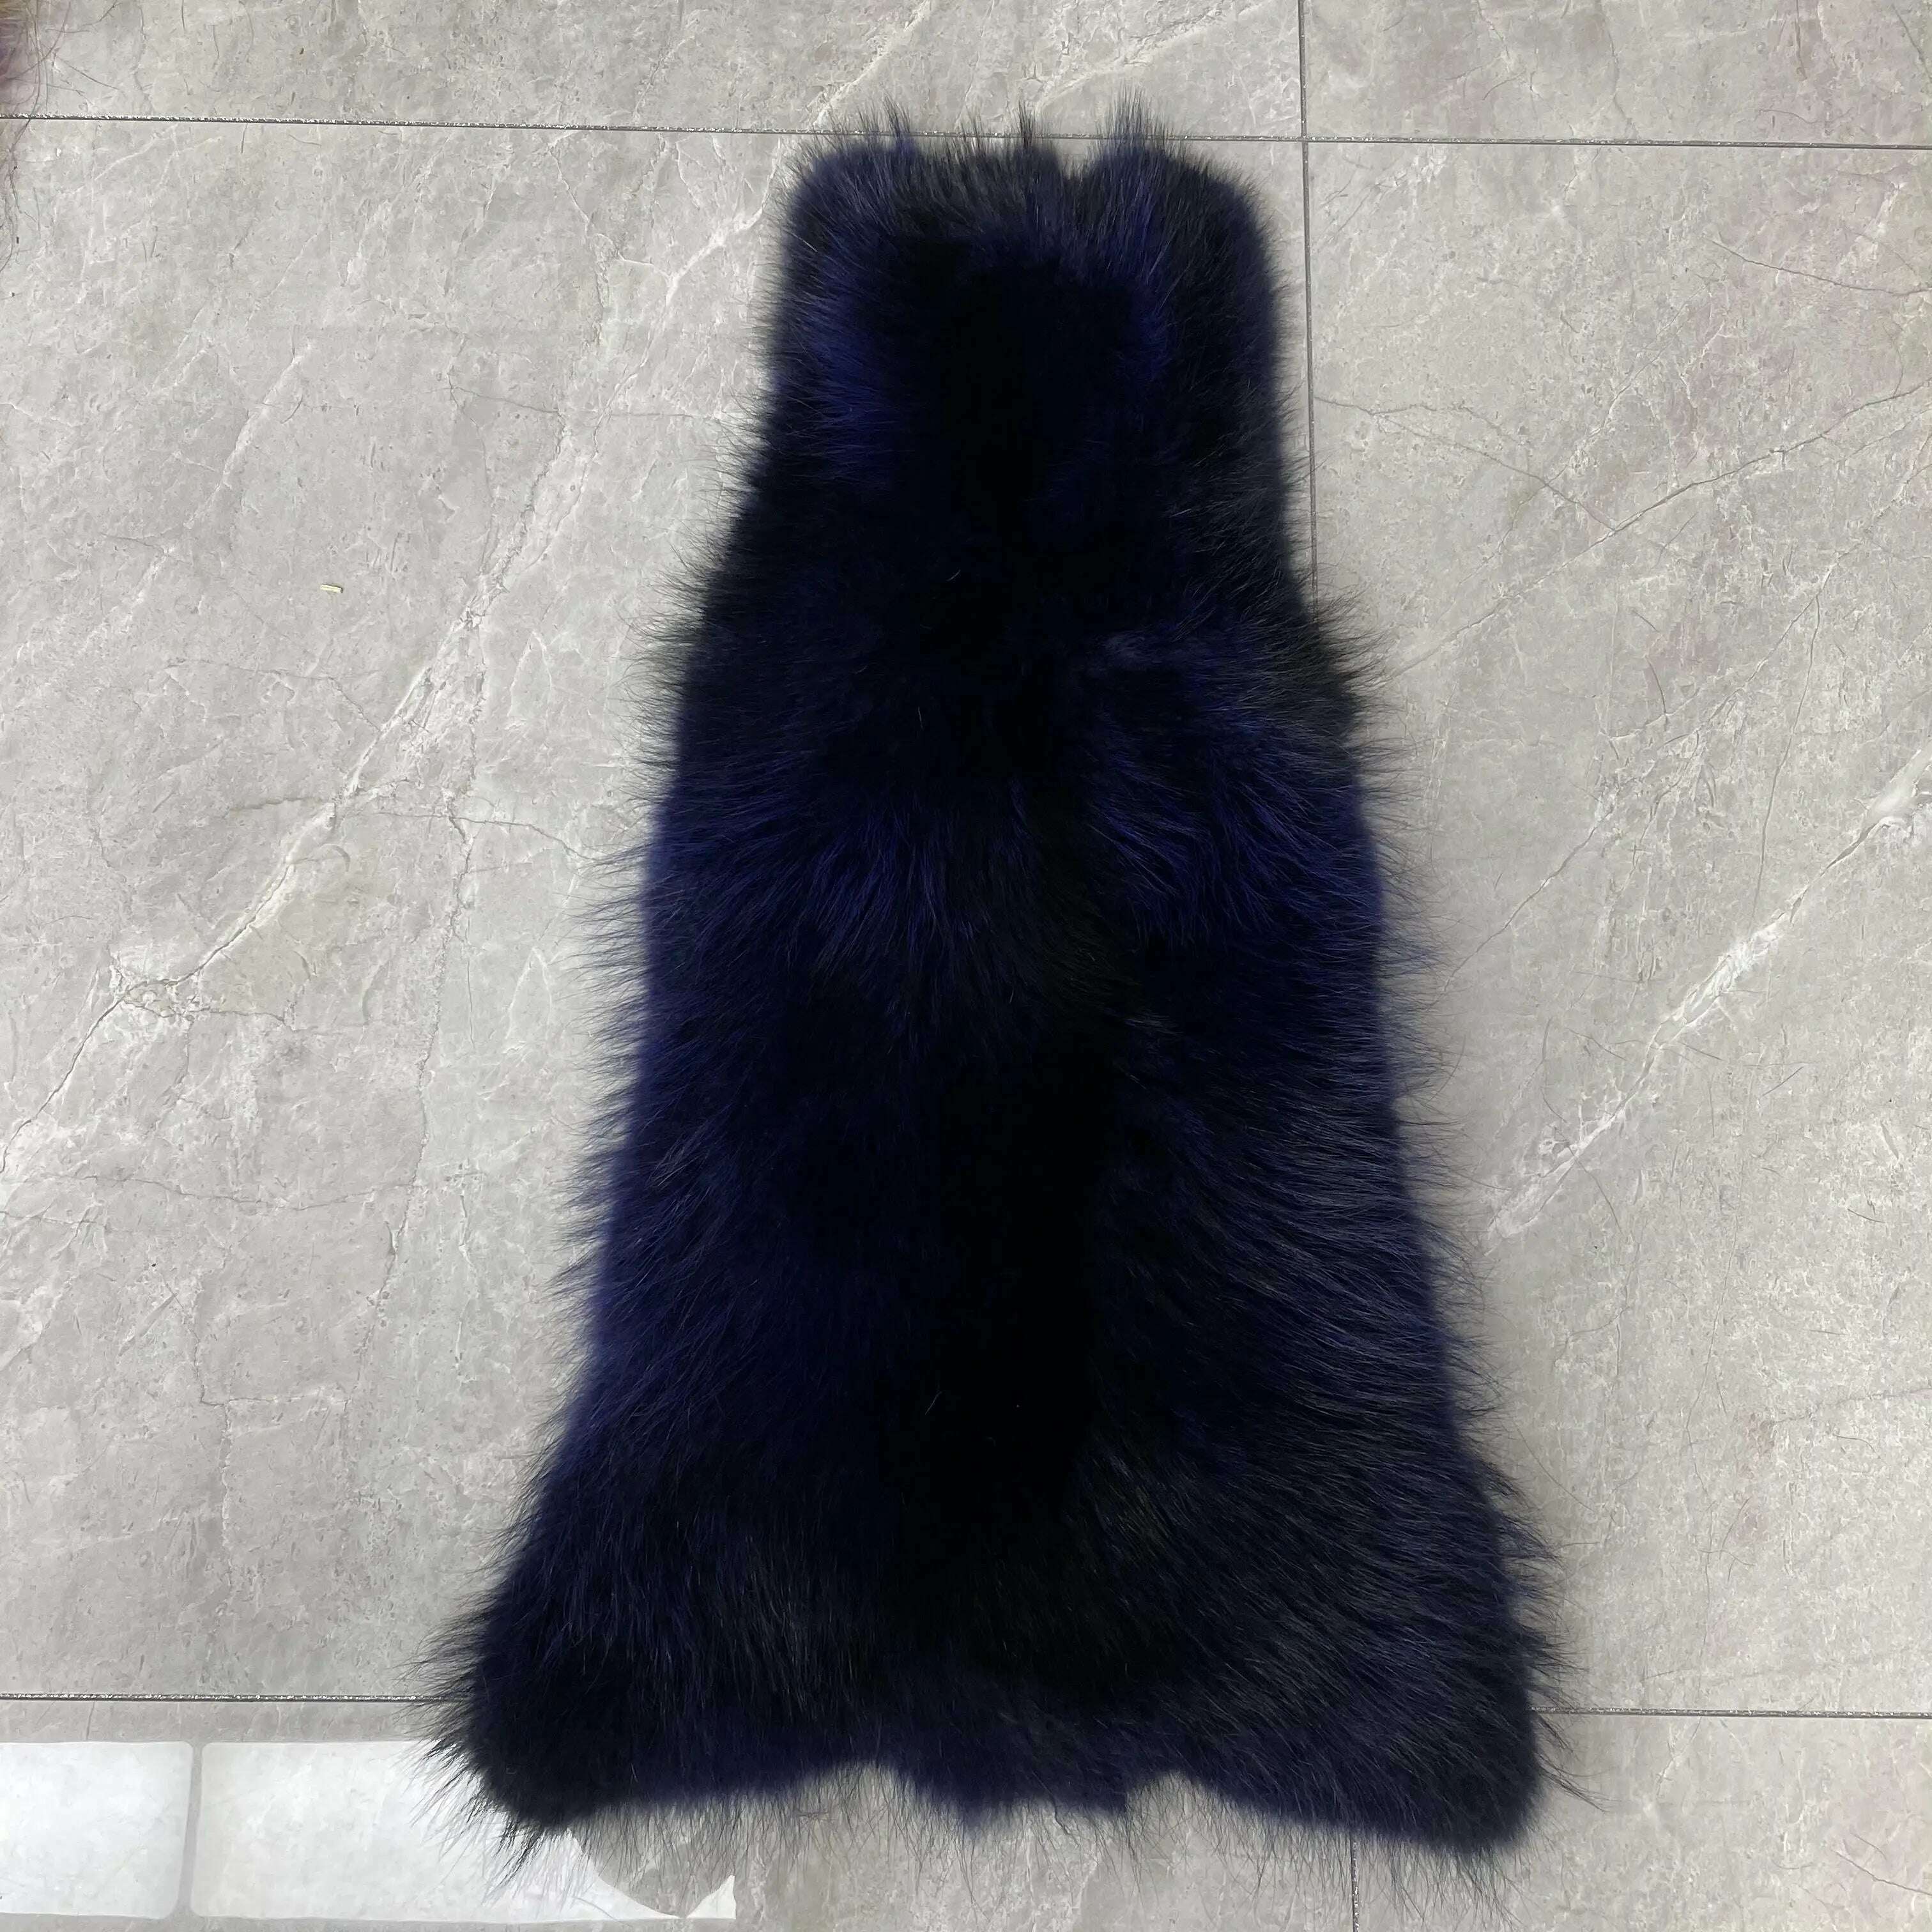 KIMLUD, Men Clothes Golden Island White Special Fox Fur Coat Full Pelt Customized Size Available, Navy / XS(88cm), KIMLUD Women's Clothes